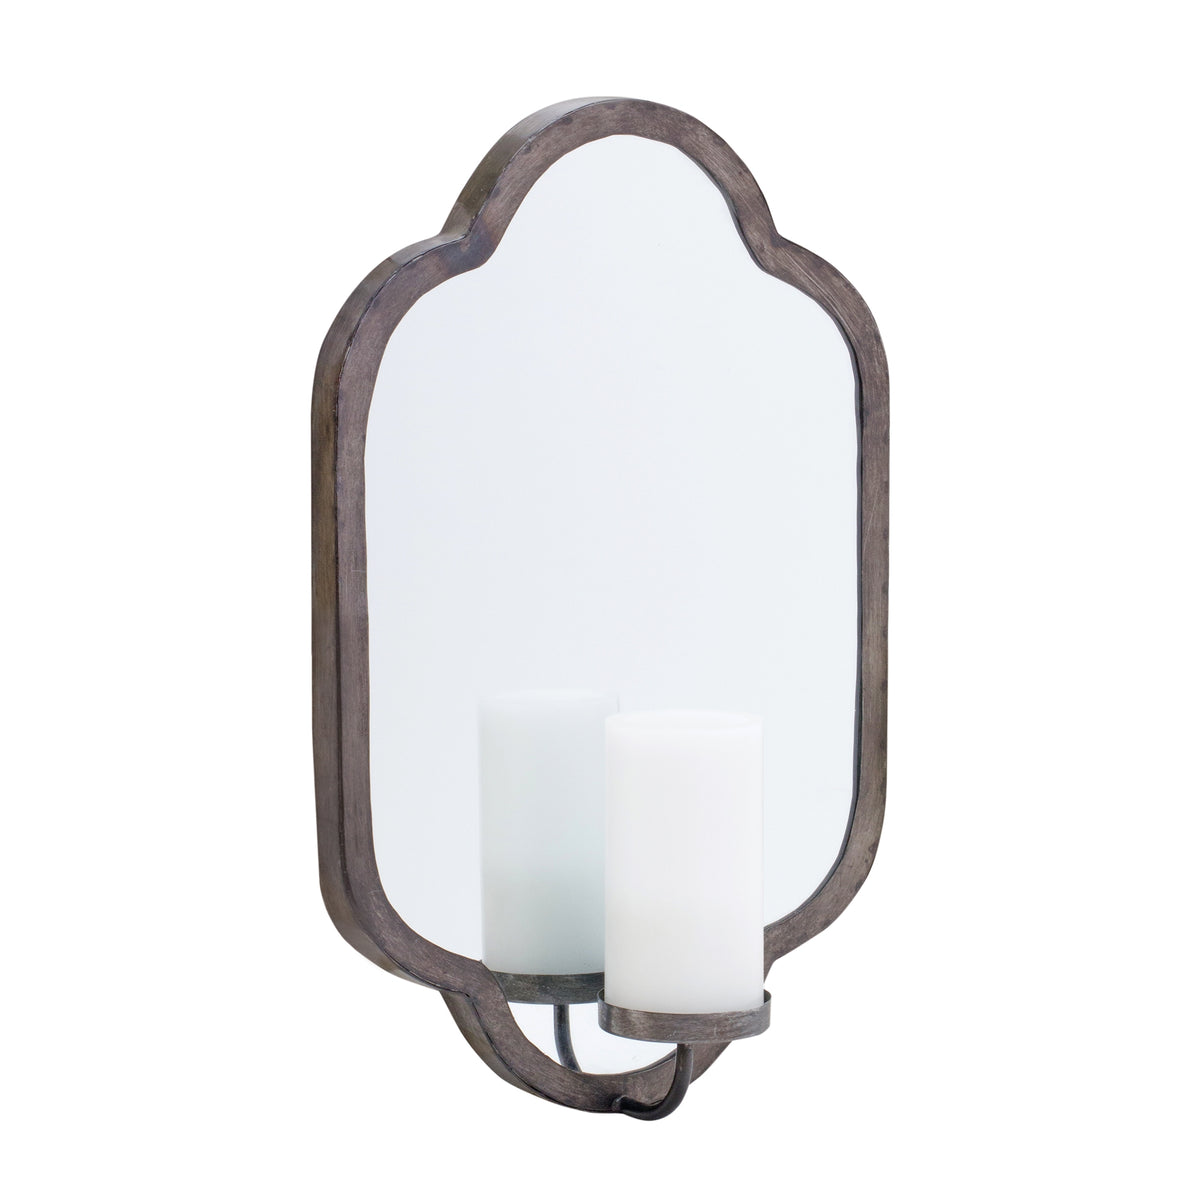 Key Largo Mirrored Candle Wall Sconces, Set of 2